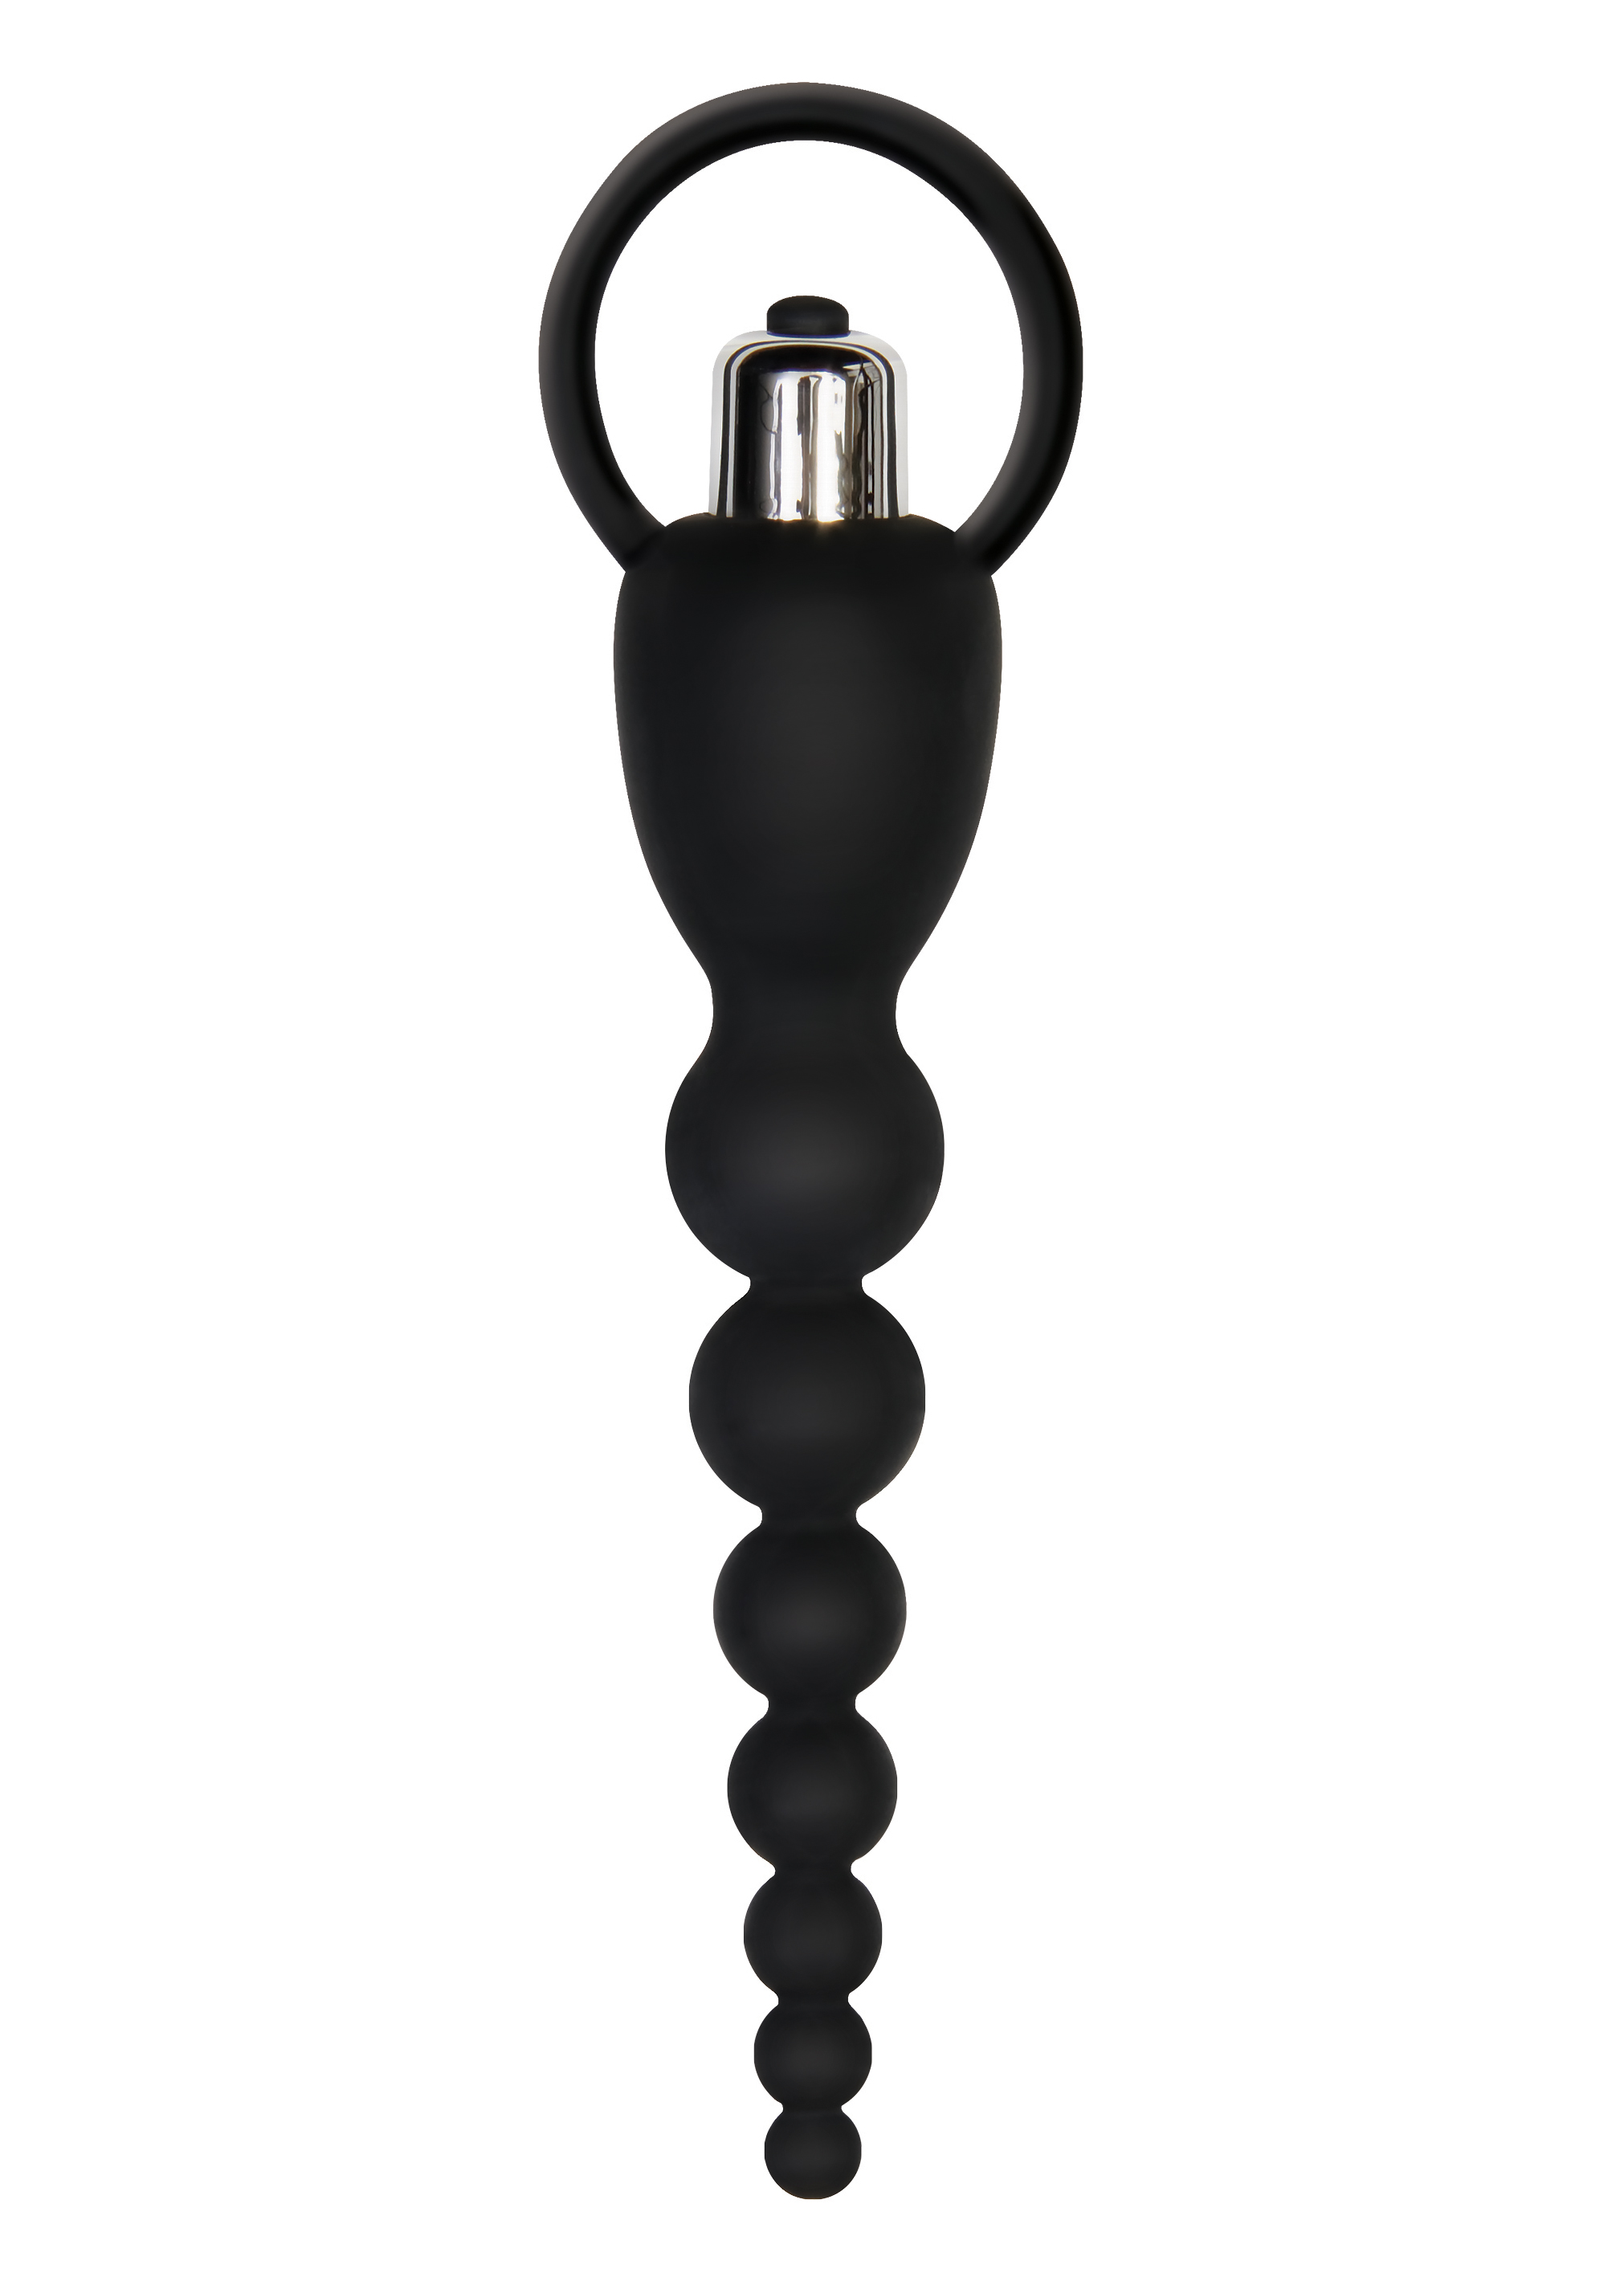 ADAM & EVE SILICONE VIBRATING ANAL BEADS  - ENAEFC87832